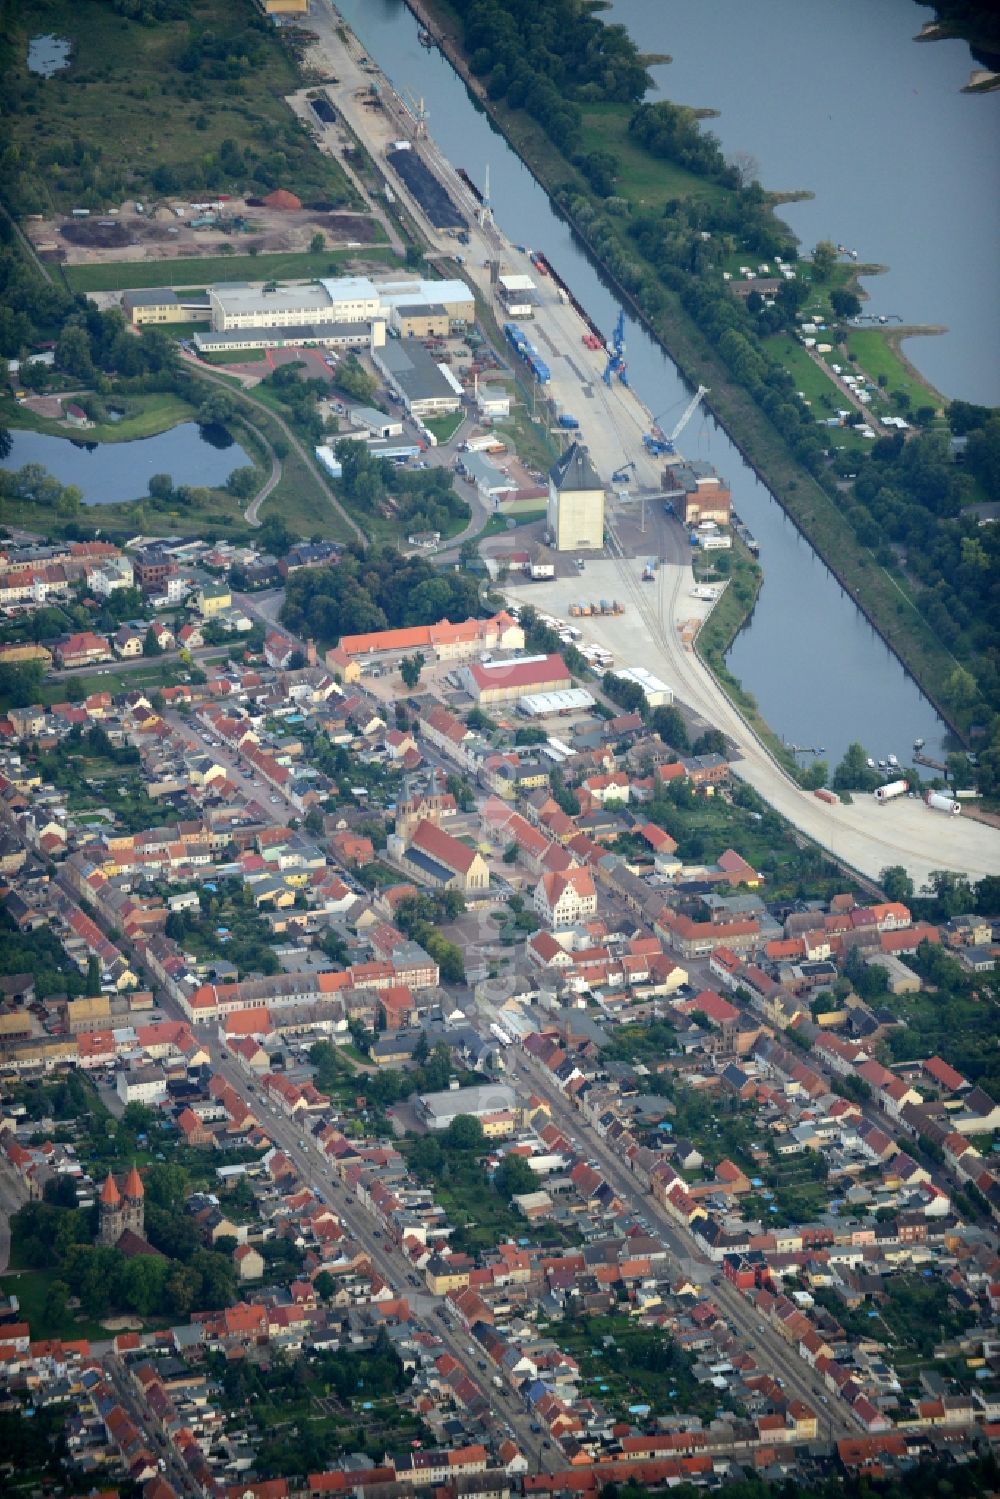 Aerial image Aken - View of Aken in the state of Saxony-Anhalt. The town consists of a symmetrical residential area on the Elbe riverbank